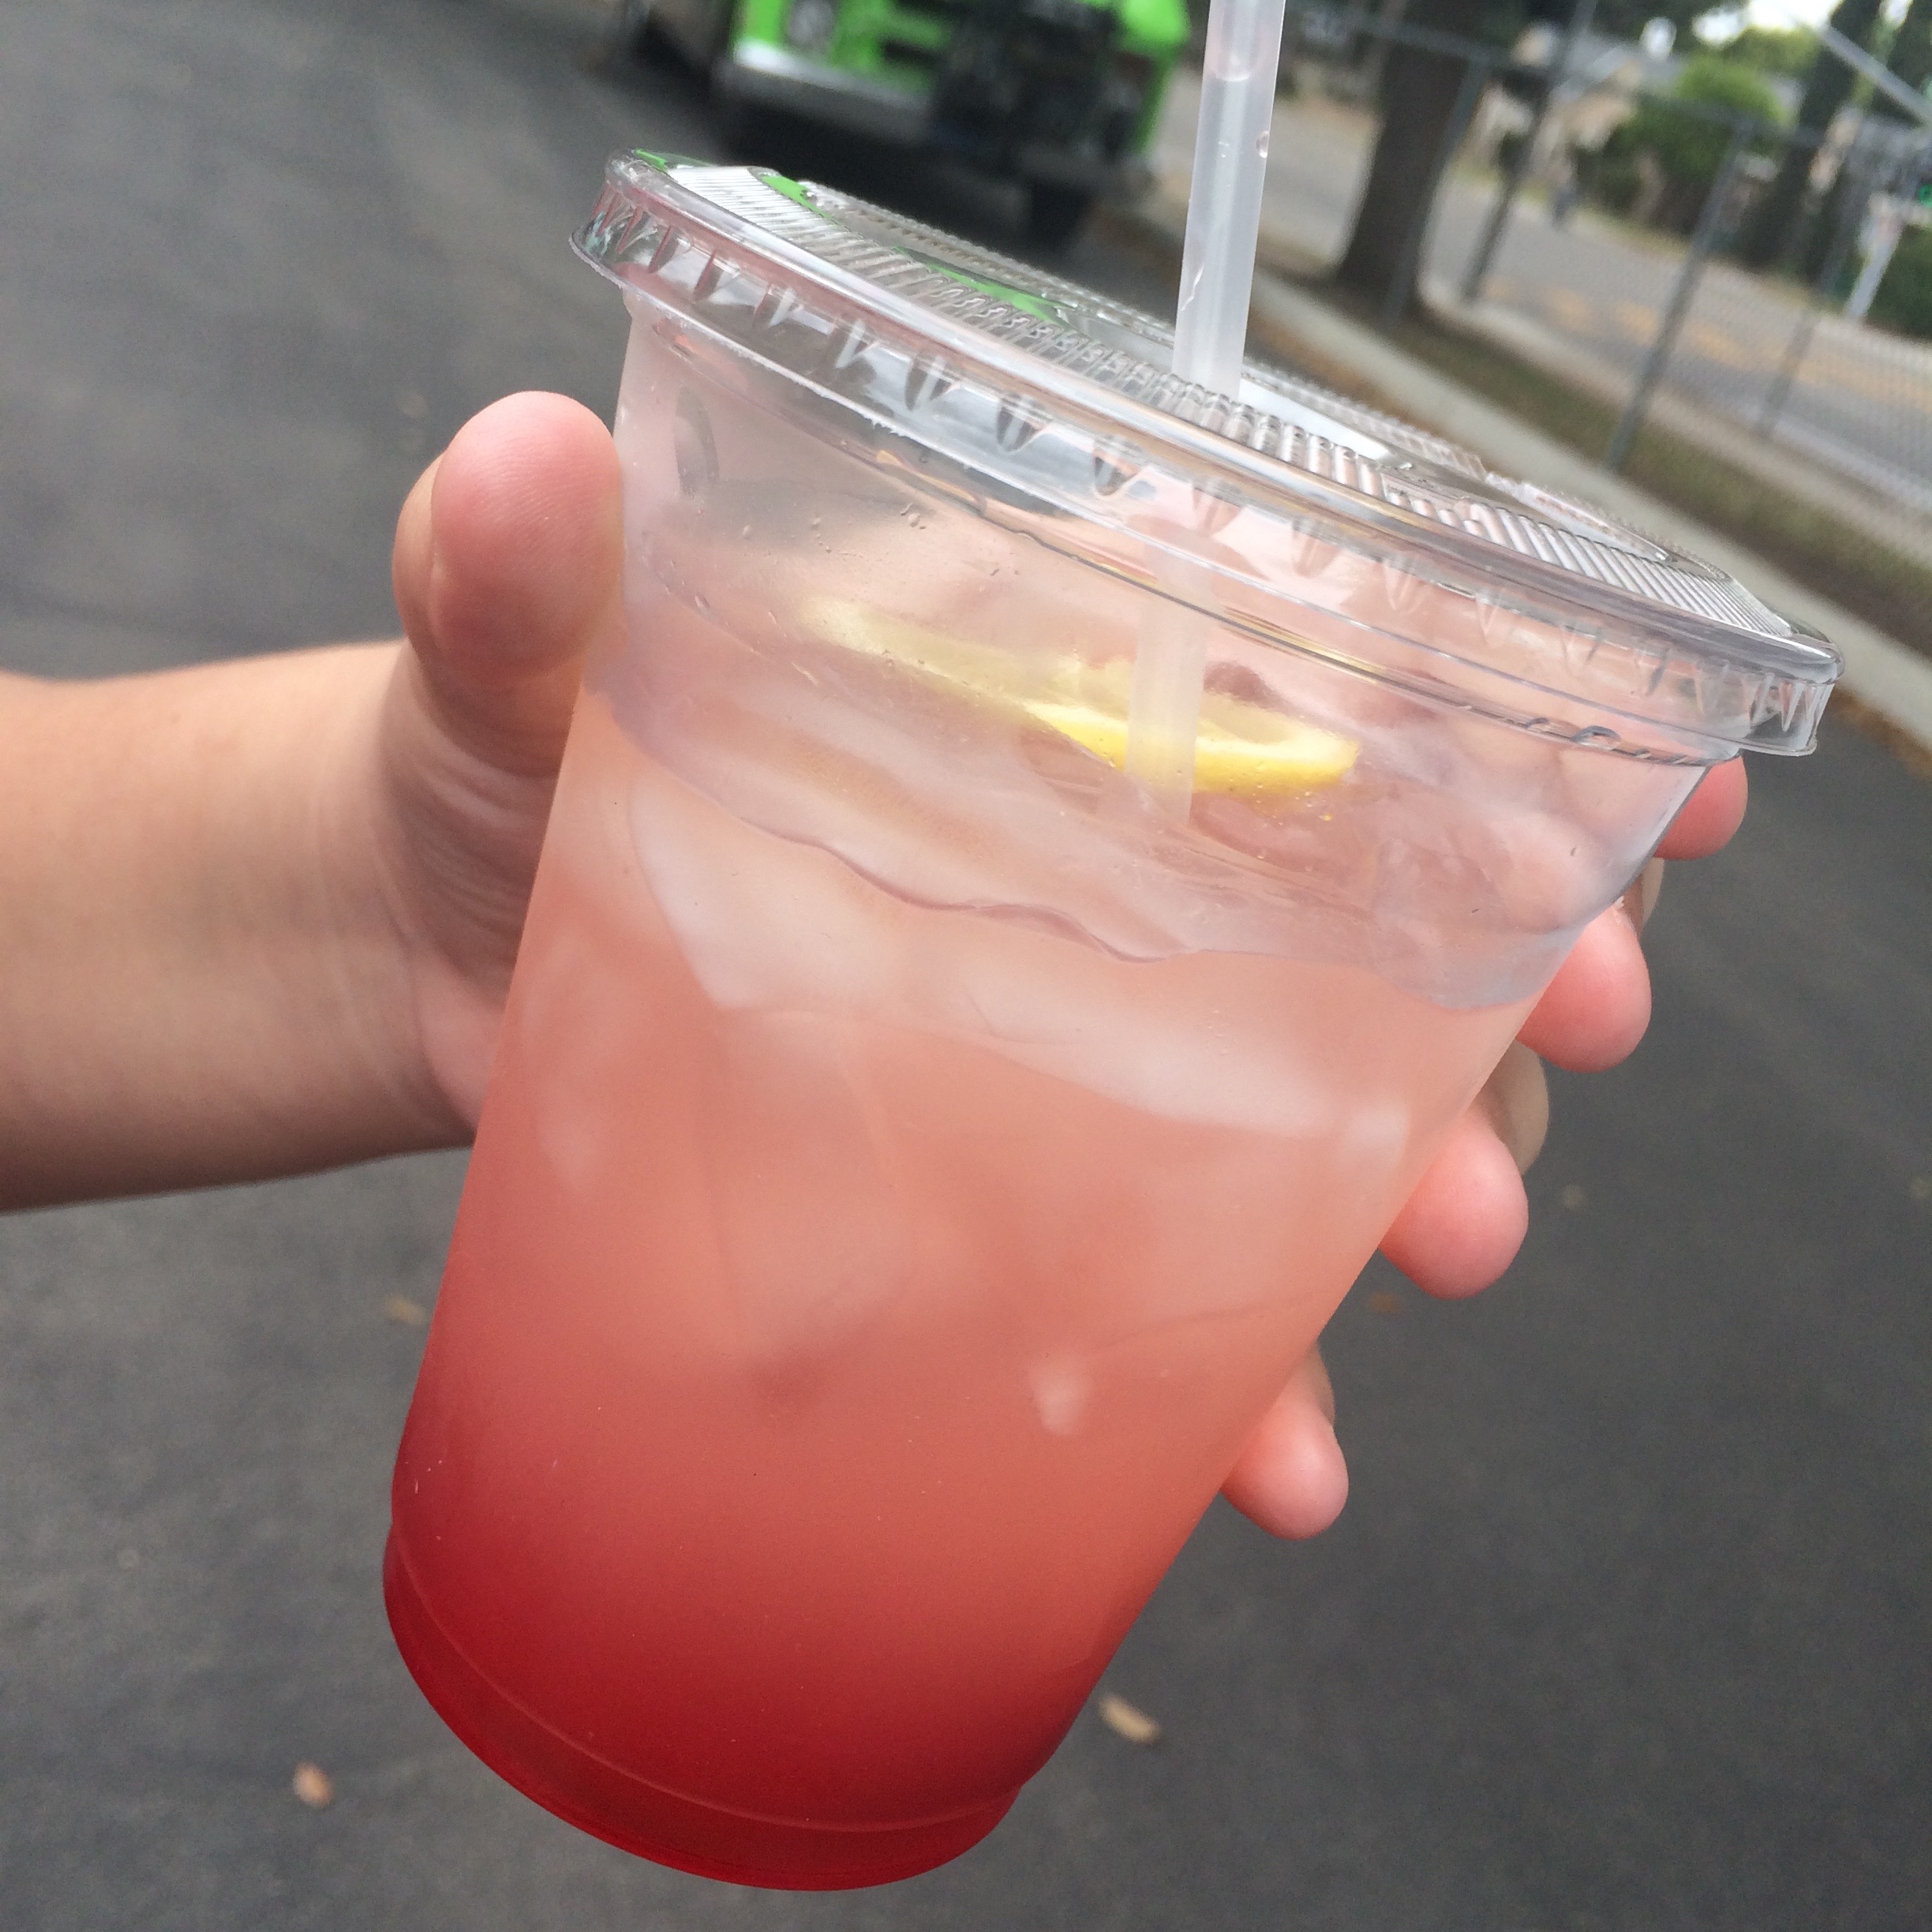 Fruity Lemonade from Where's the Food?